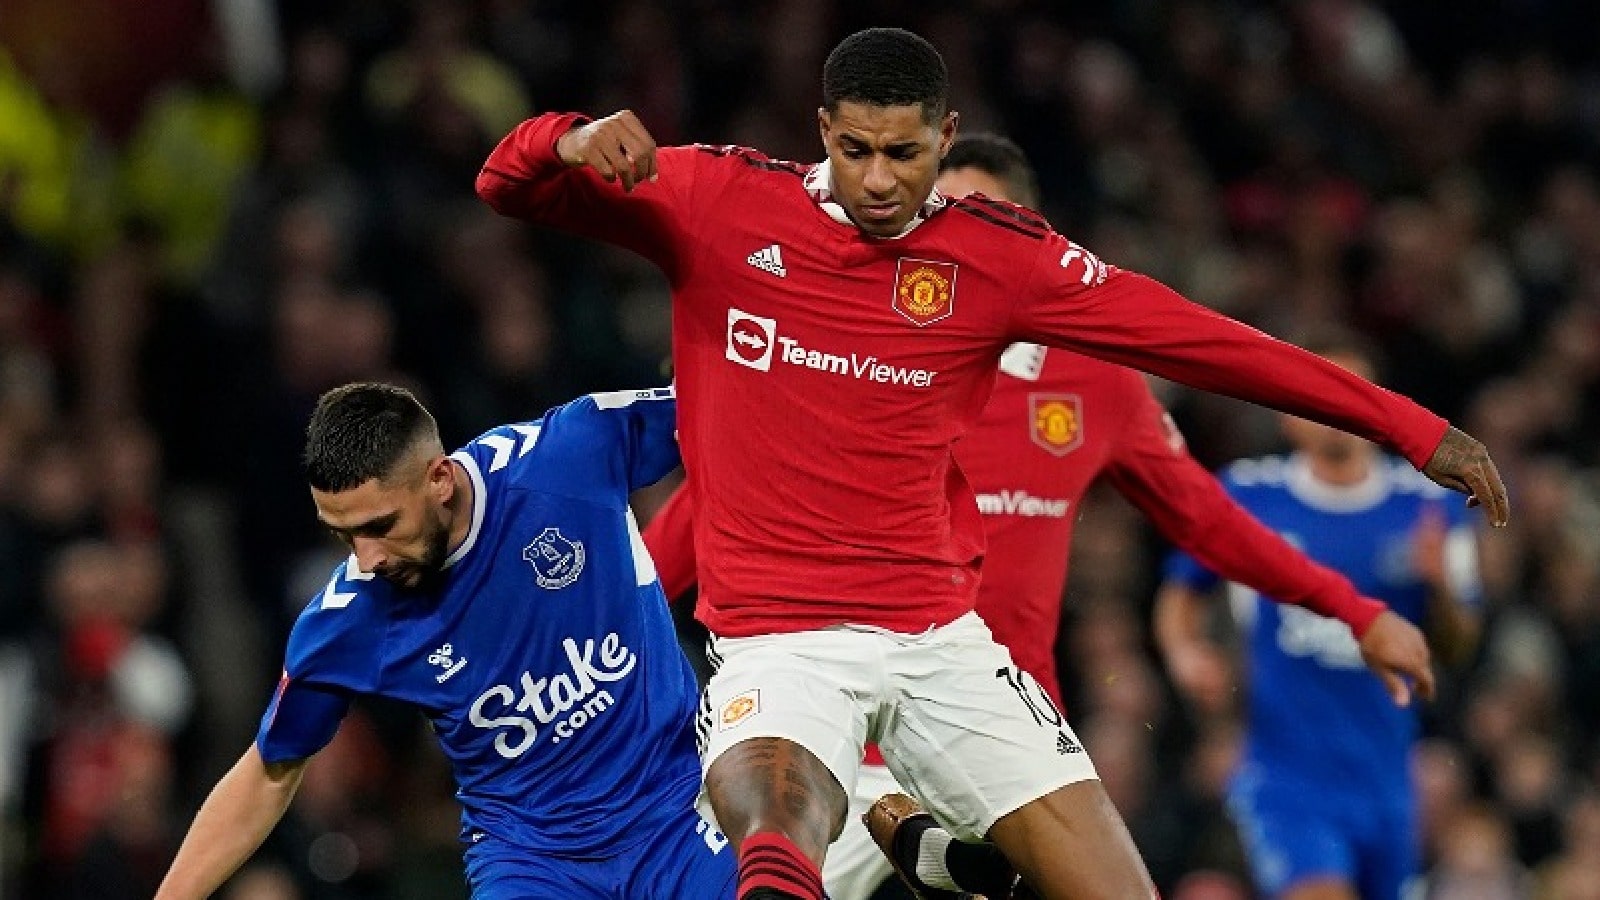 Marcus Rashford feels he is in the best form of his career as the England international starred for Manchester United in their 3-1 defeat of Everton.